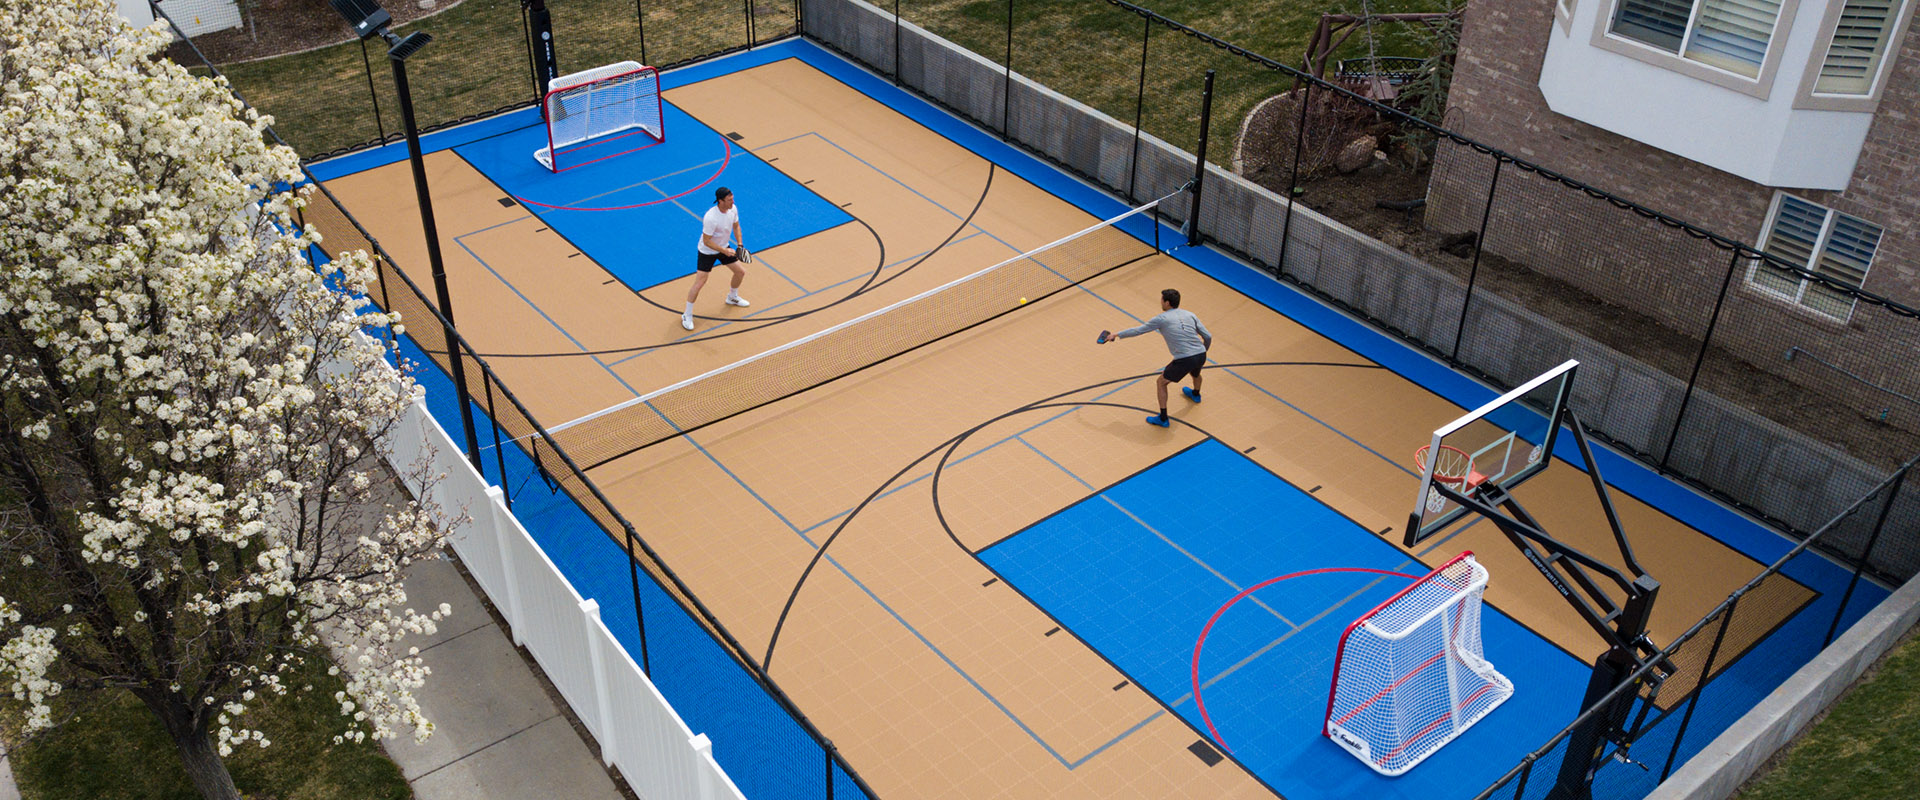 SnapSports Releases Exclusive Pickleball Surface - SnapSports